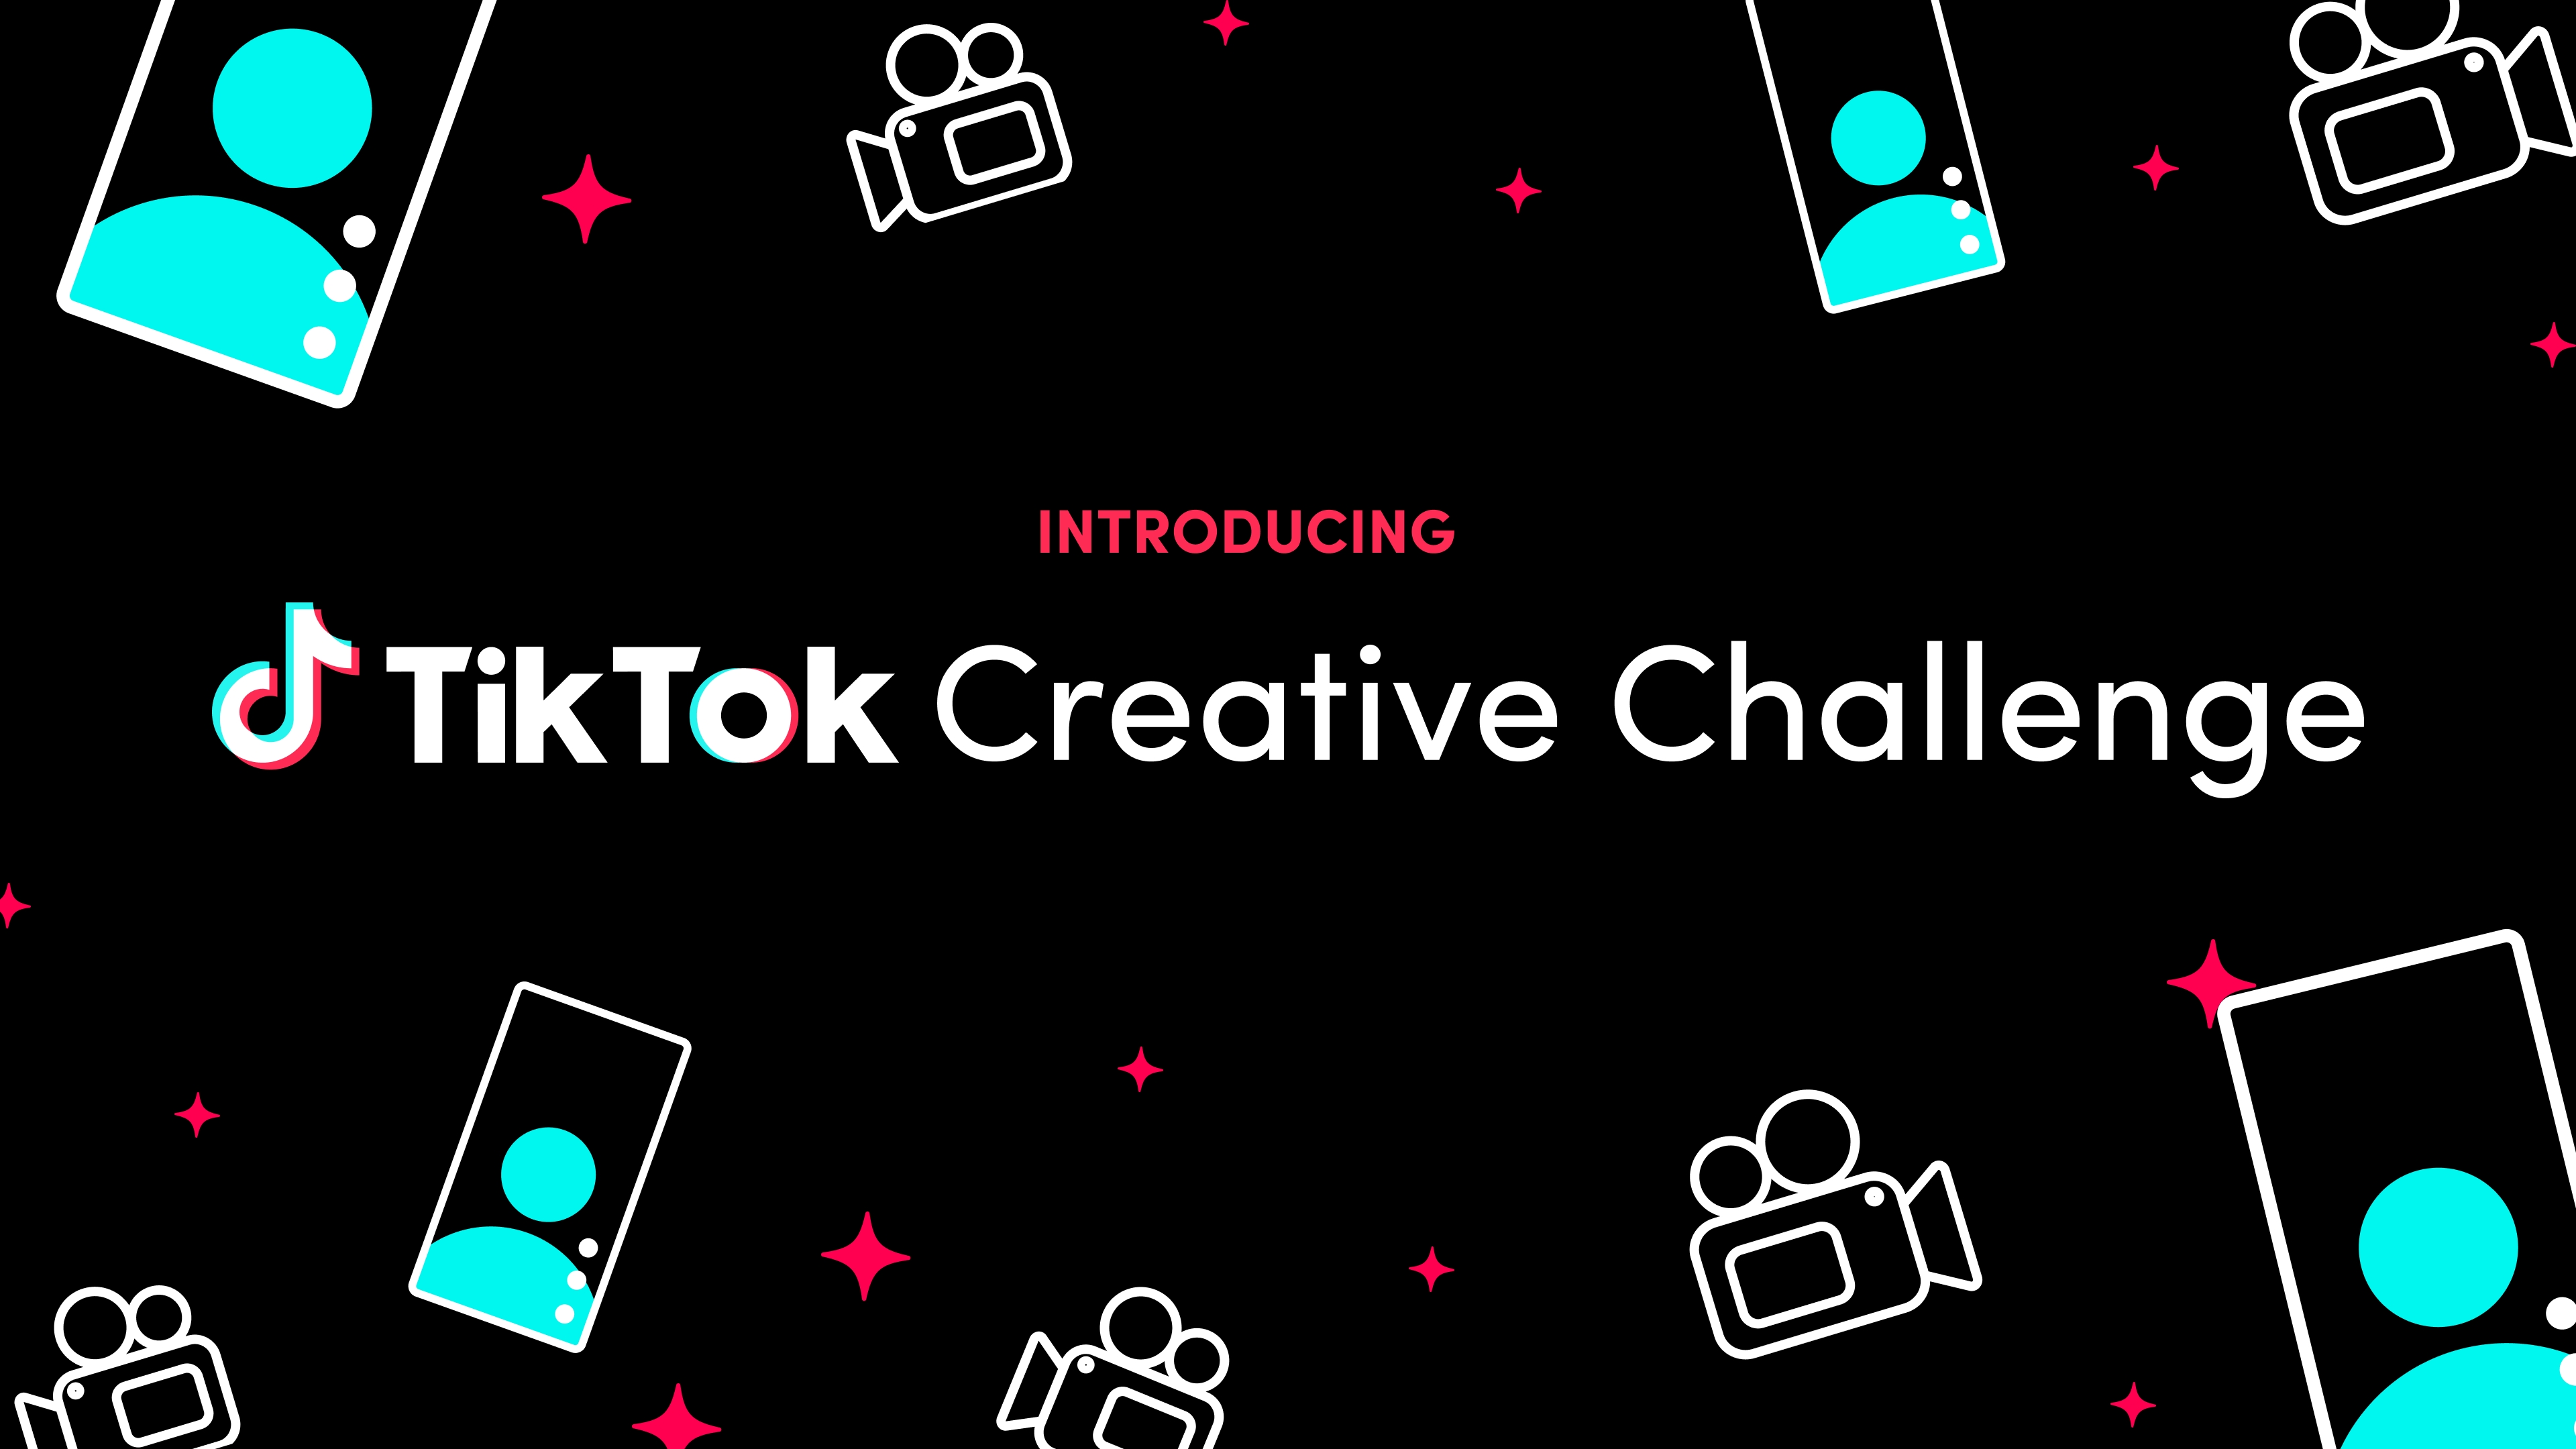  The image shows the TikTok logo and the words 'TikTok Creative Challenge' on a black background with some illustrations of people, cameras, and sparkles.